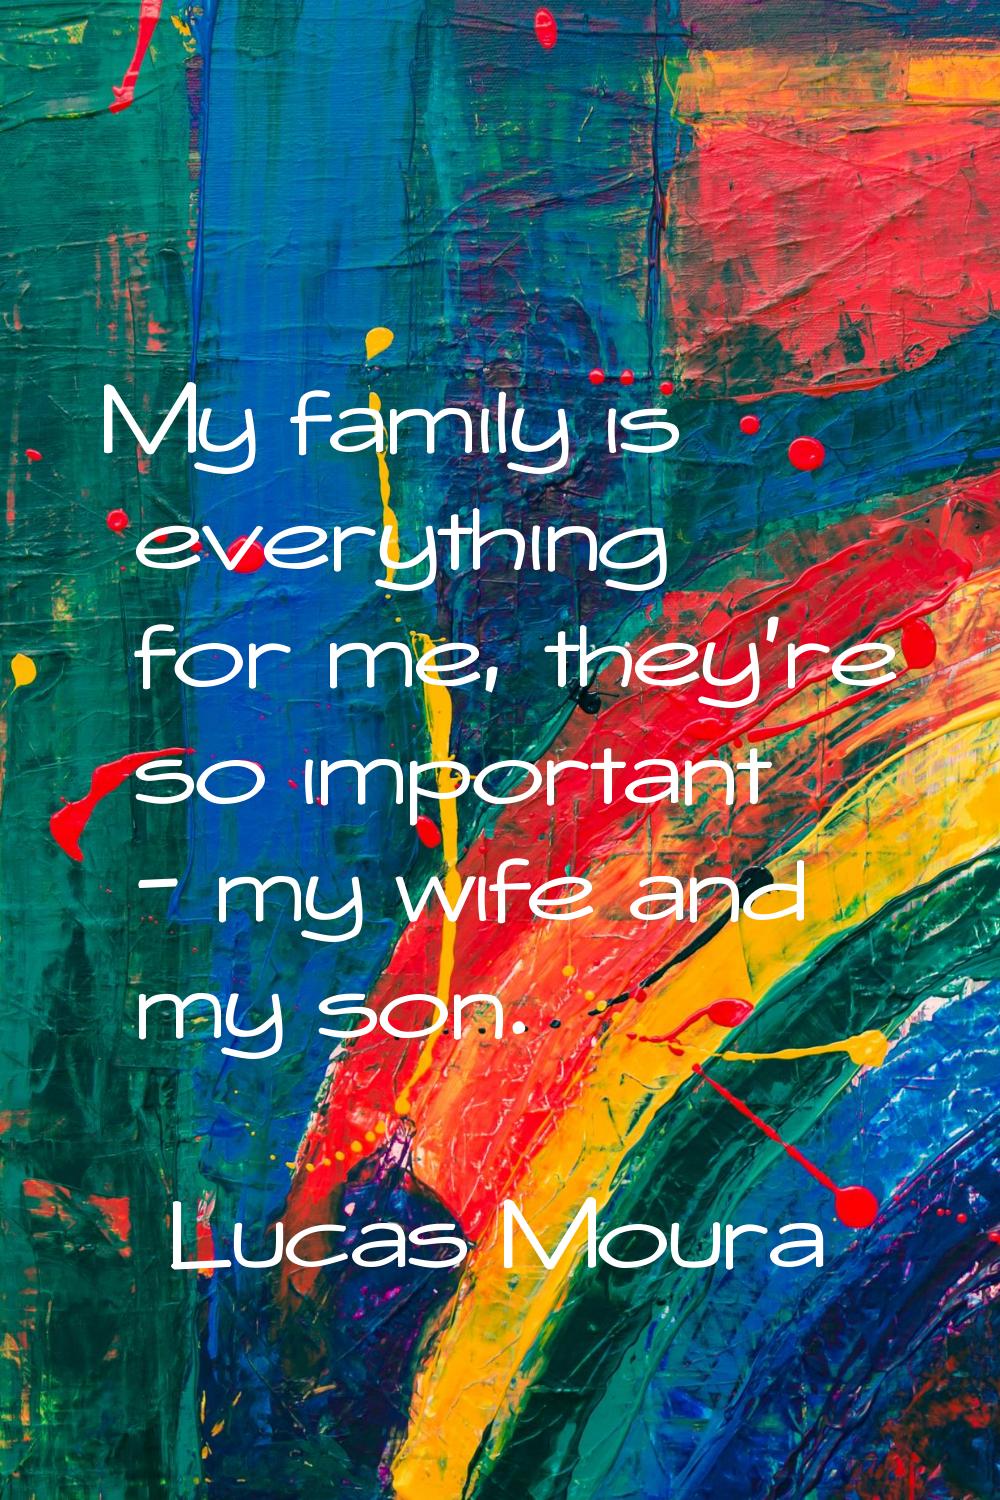 My family is everything for me, they're so important - my wife and my son.